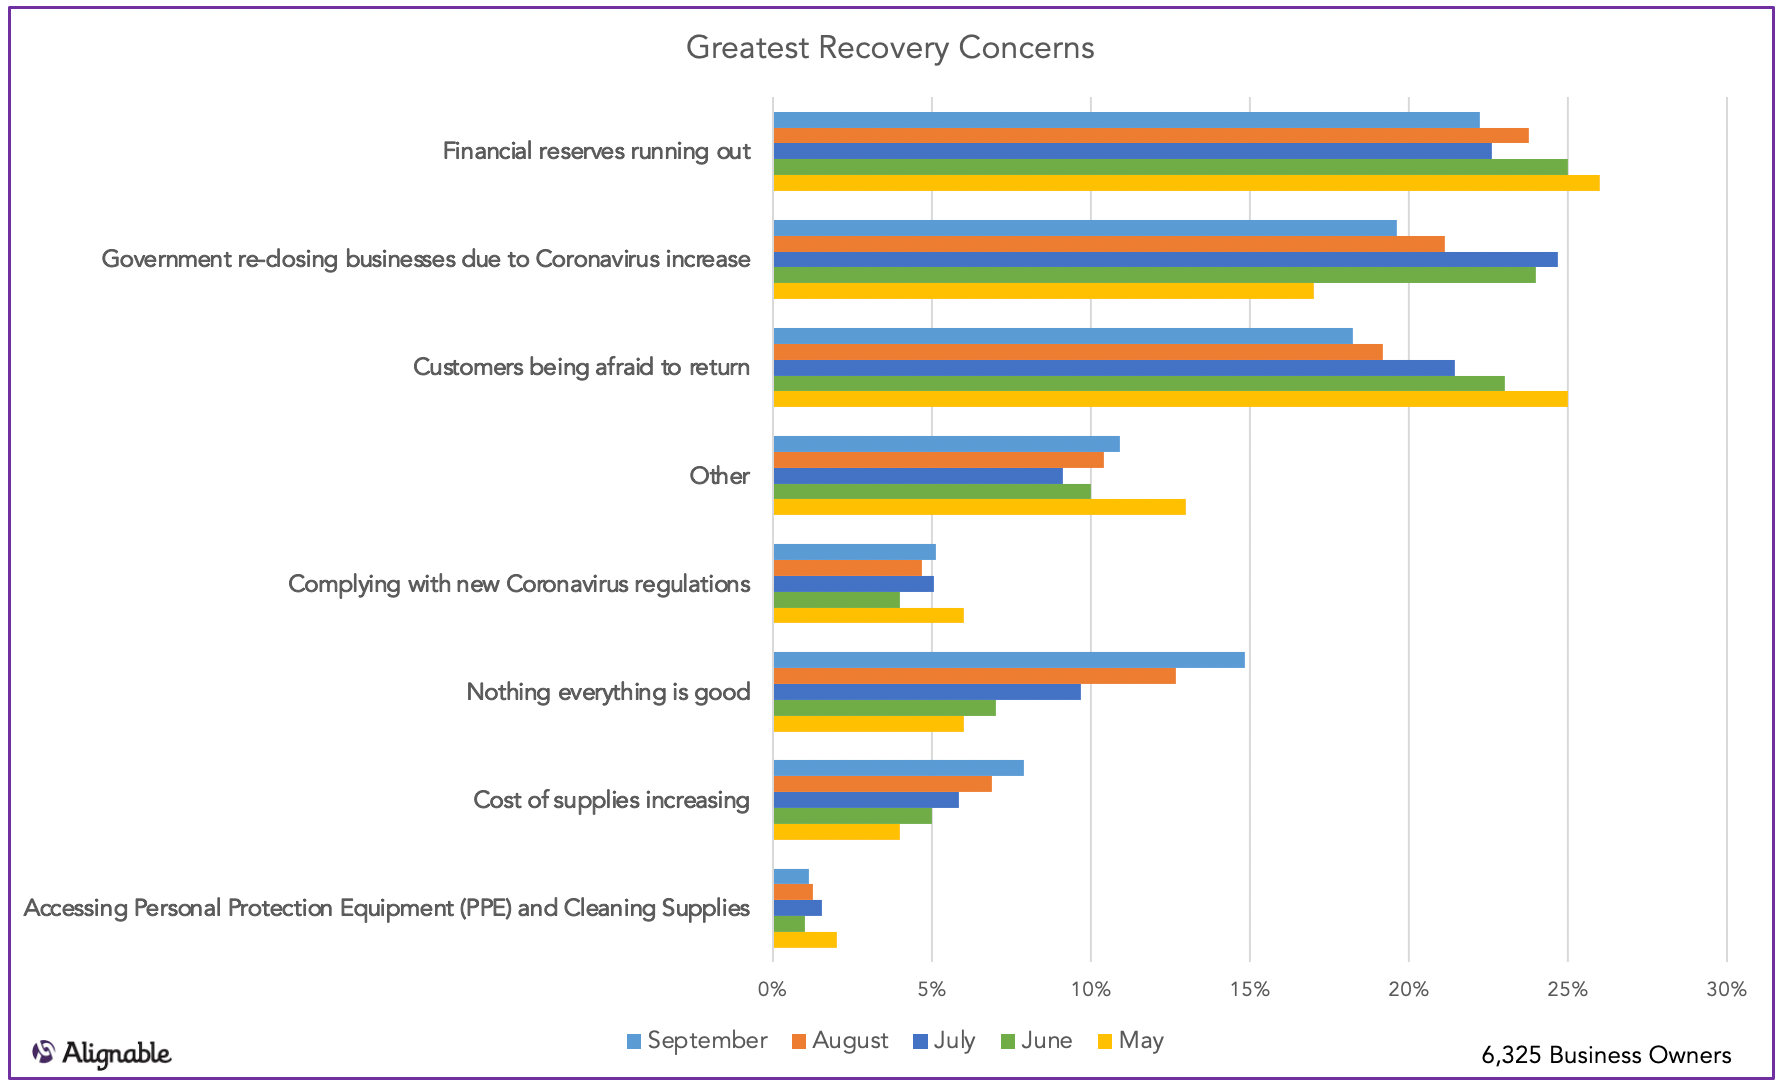 Greatest Recovery Concerns over time